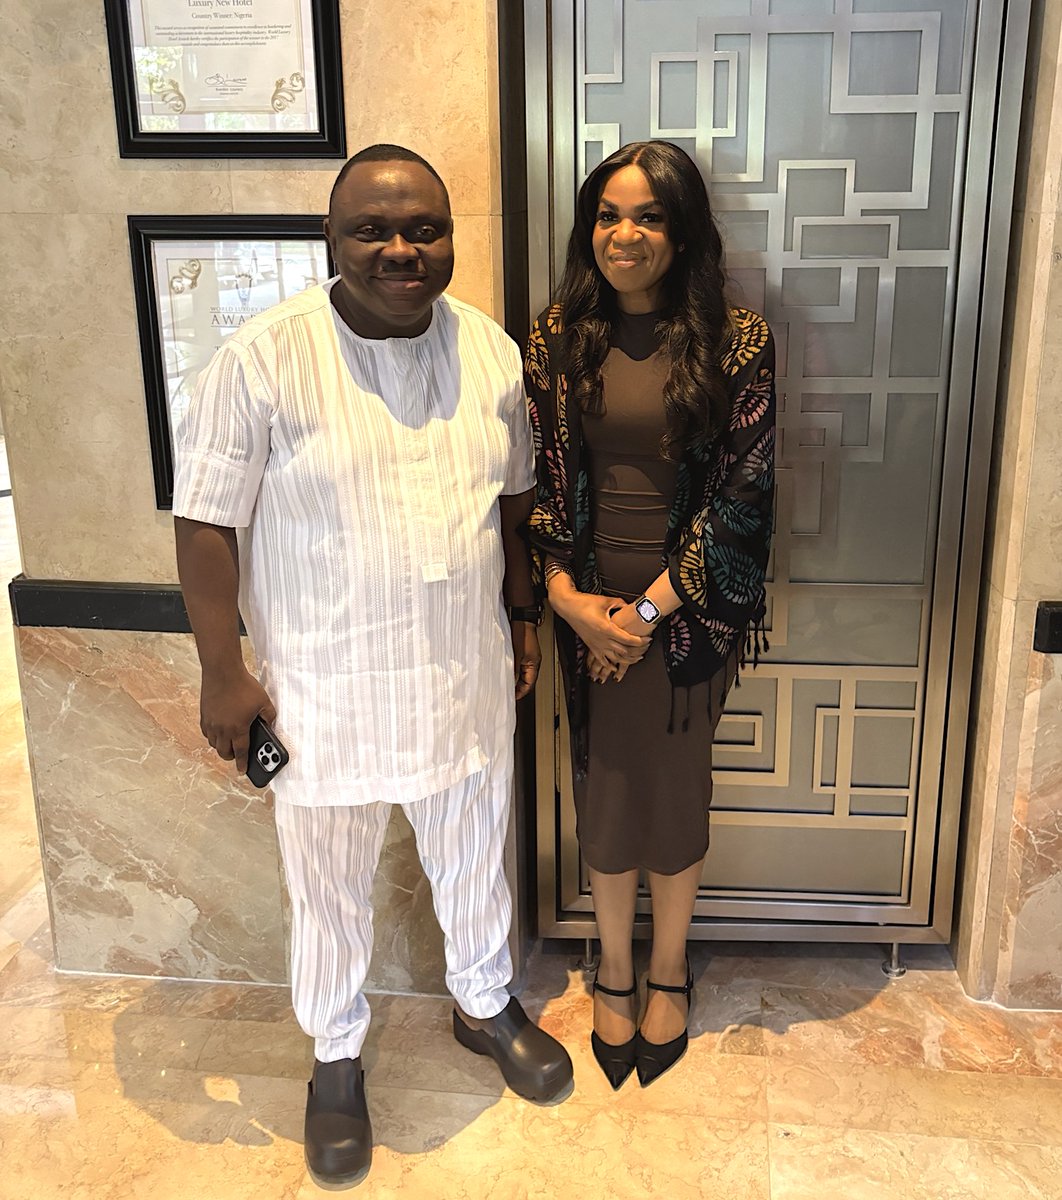 It was a pleasure meeting with the Honourable Commissioner, @followlasg Ministry of Energy and Mineral Resources, @Biodunogunleye.

We discussed how a clean #energytransition could be undertaken while guaranteeing #energyaccess for all.